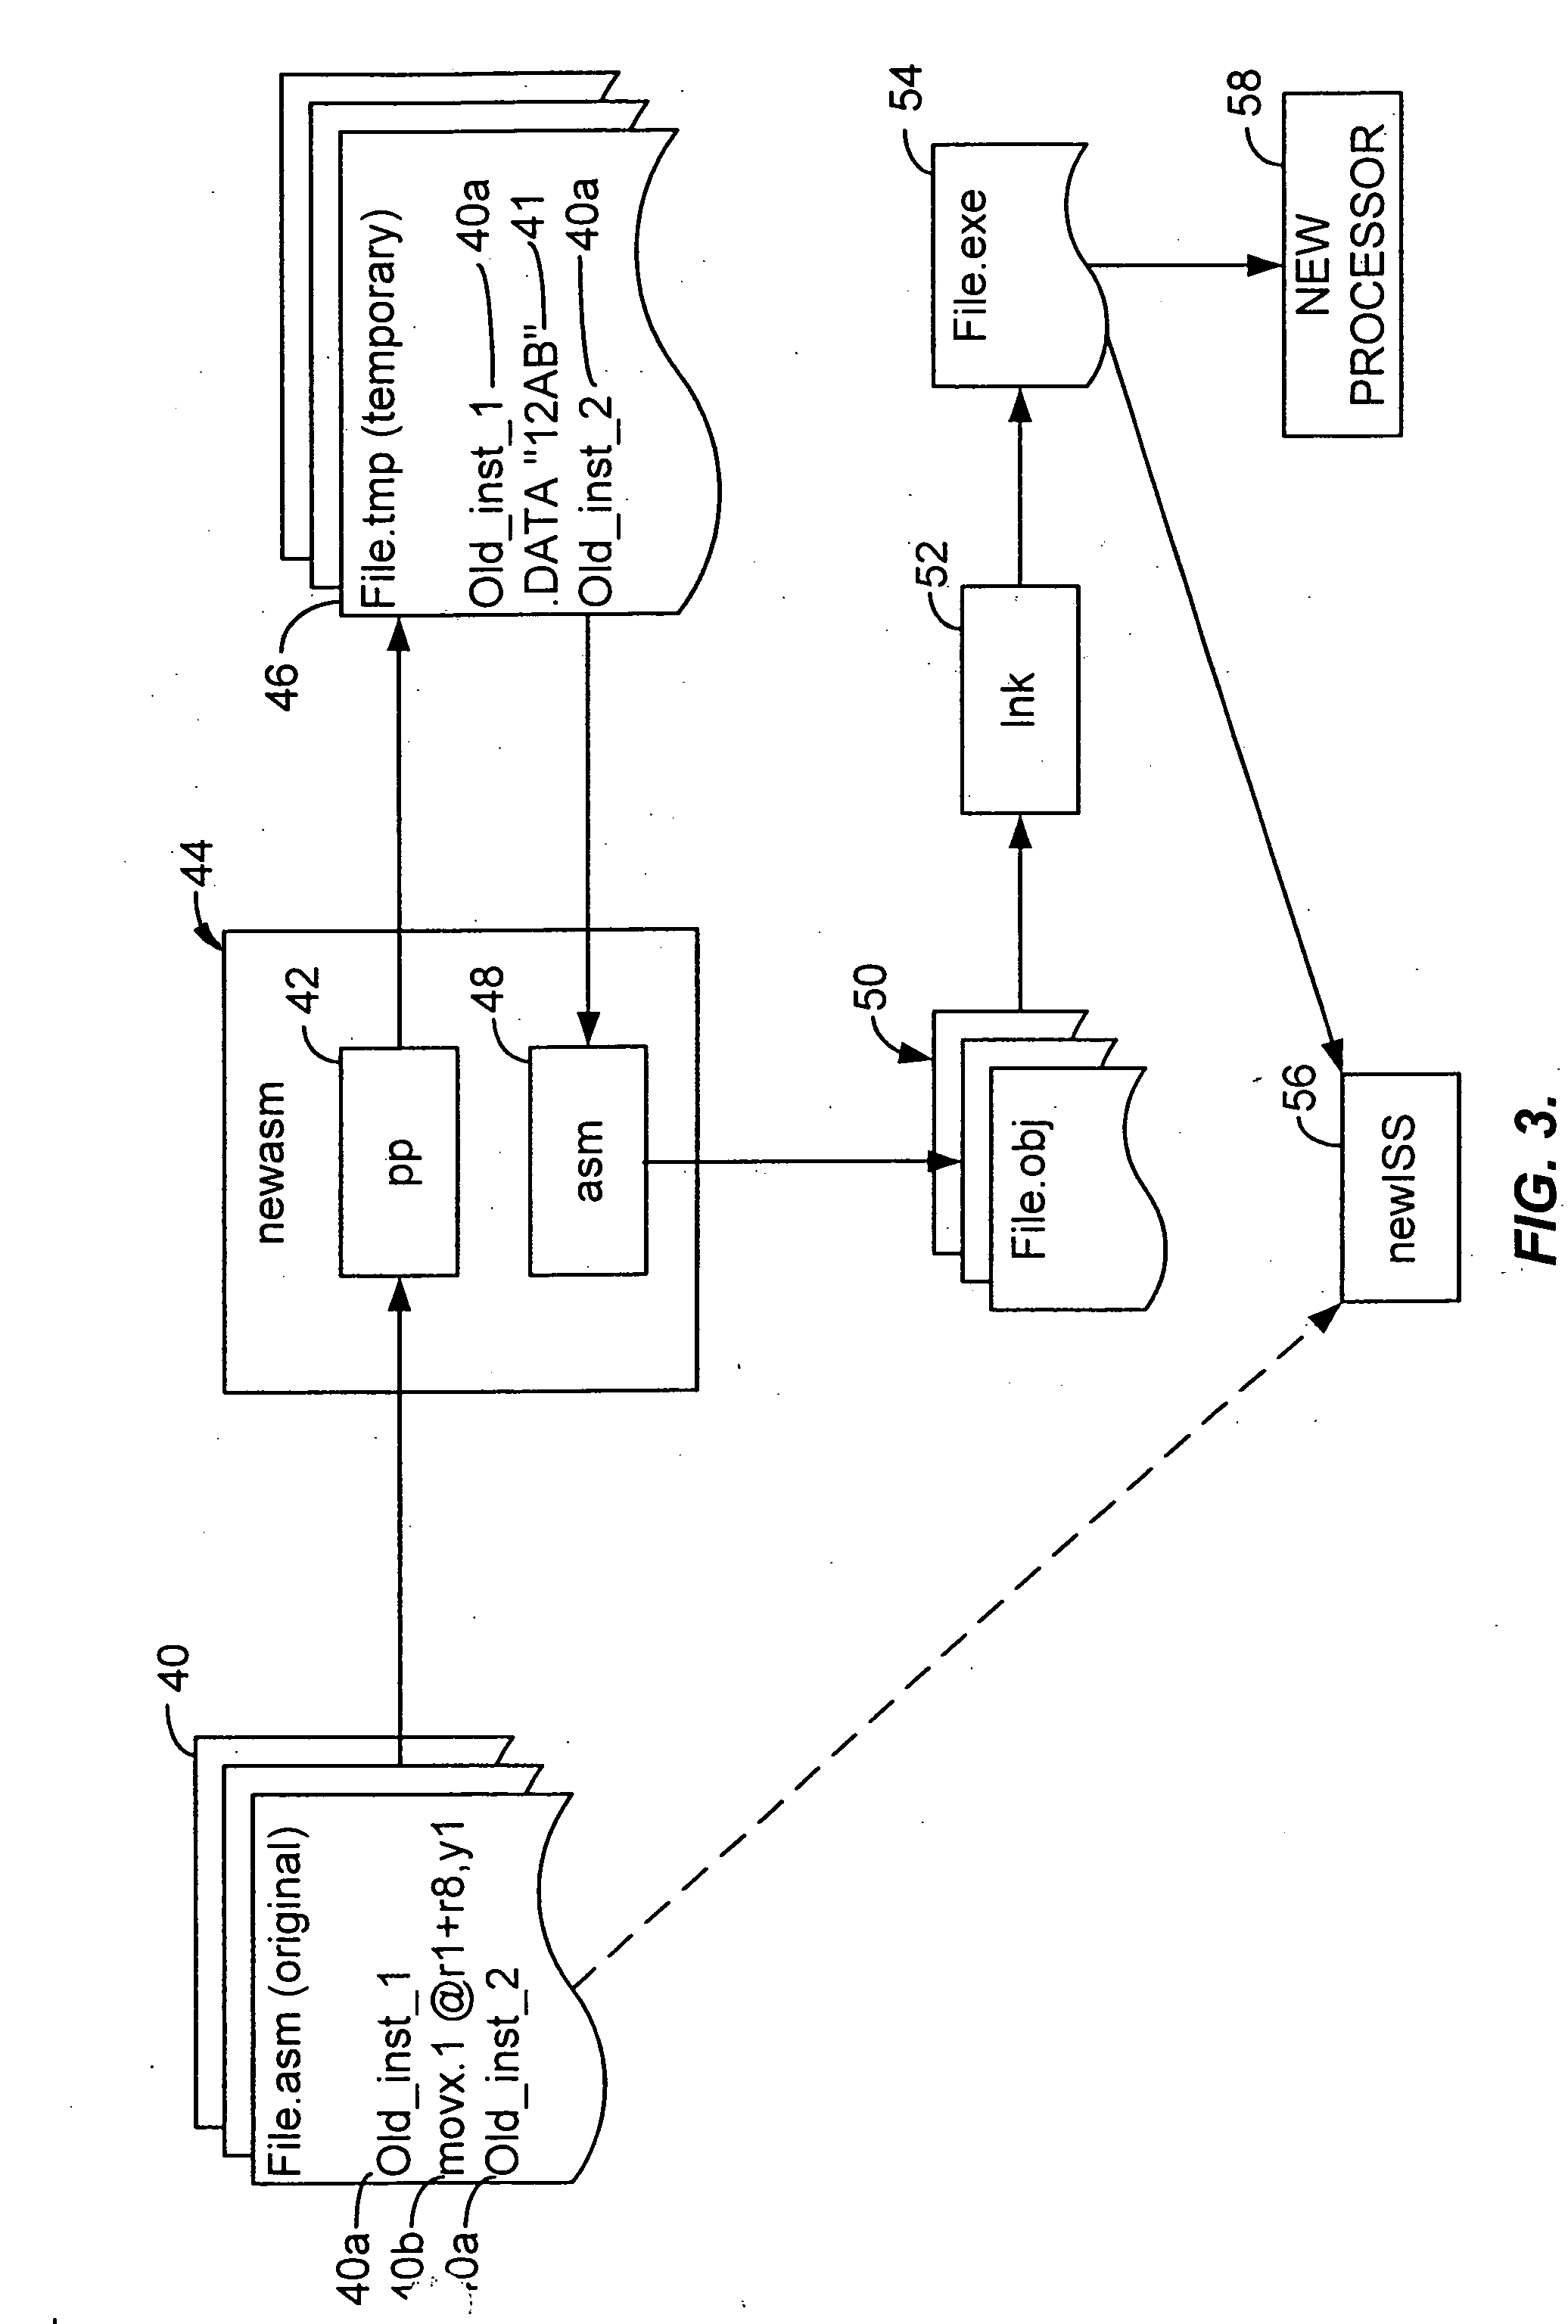 Assembly language code compilation for an instruction-set architecture containing new instructions using the prior assembler